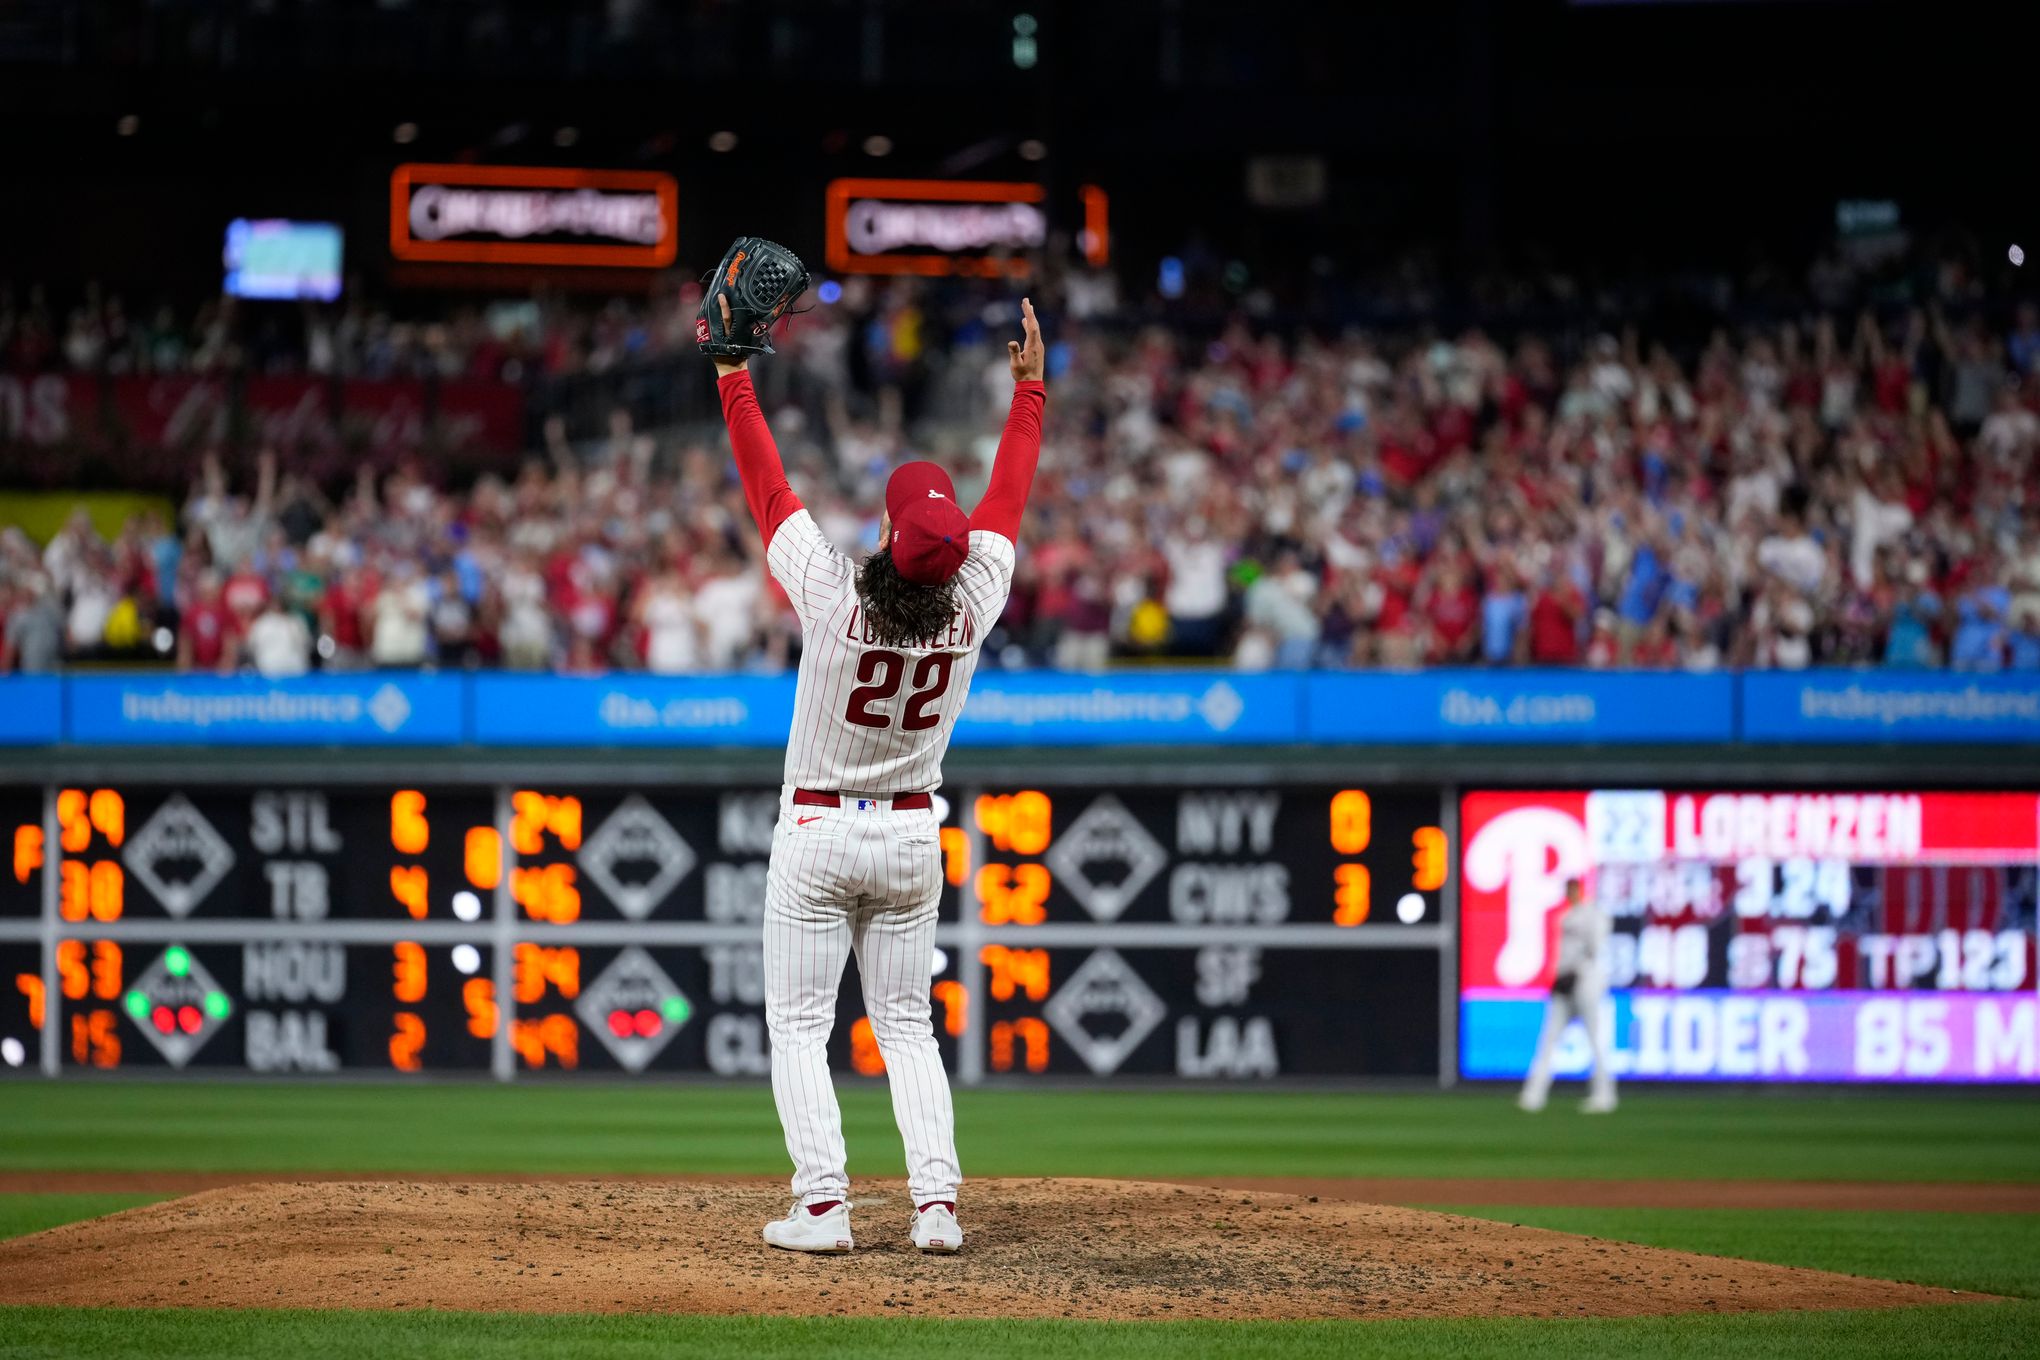 Top single-season performances by righties in Phillies history